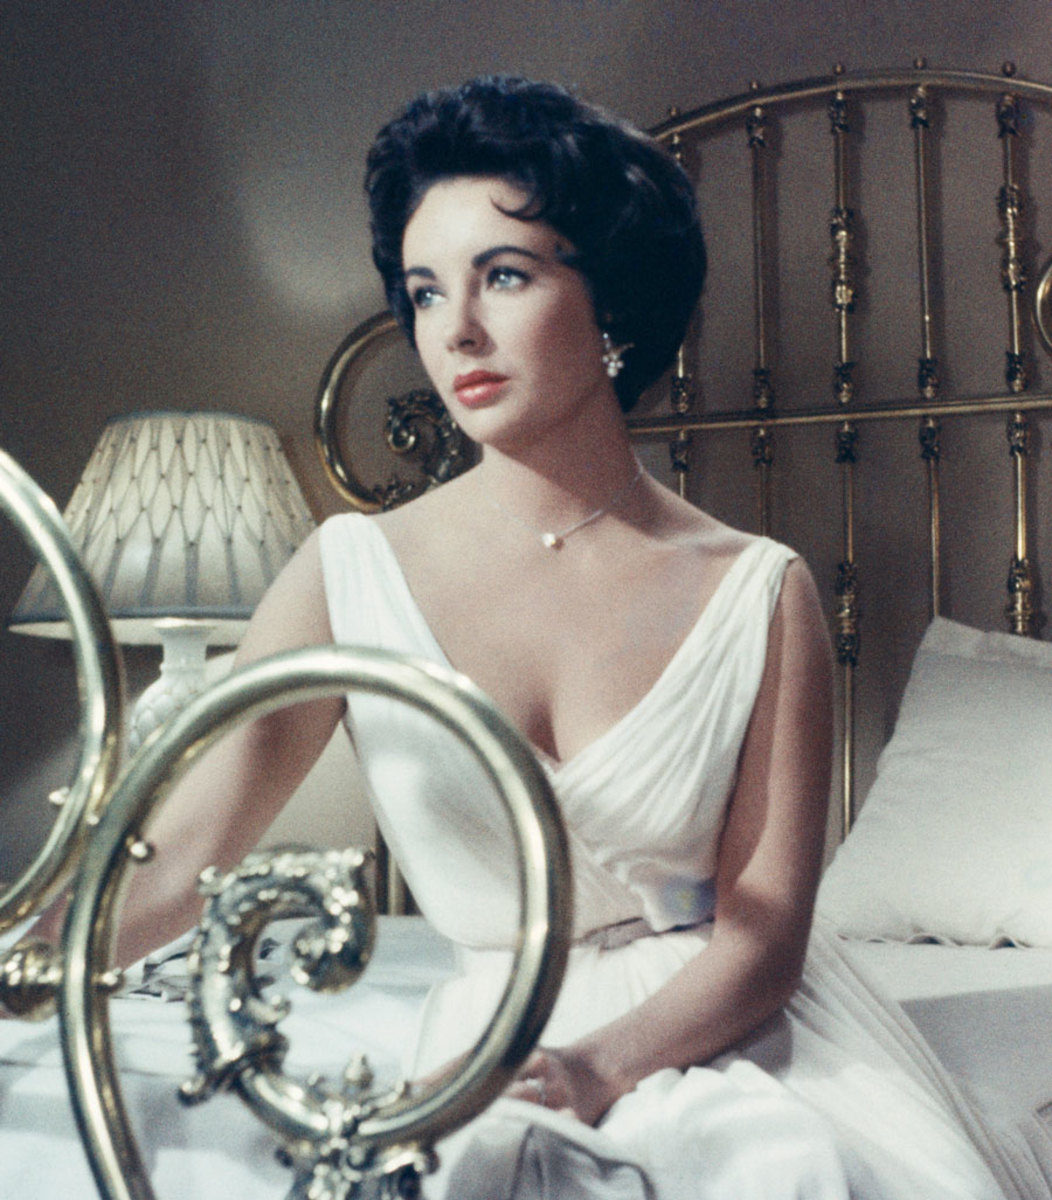 Elizabeth Taylor wearing the diamond heart pendant in "Cat On A Hot Tin Roof," 1958.